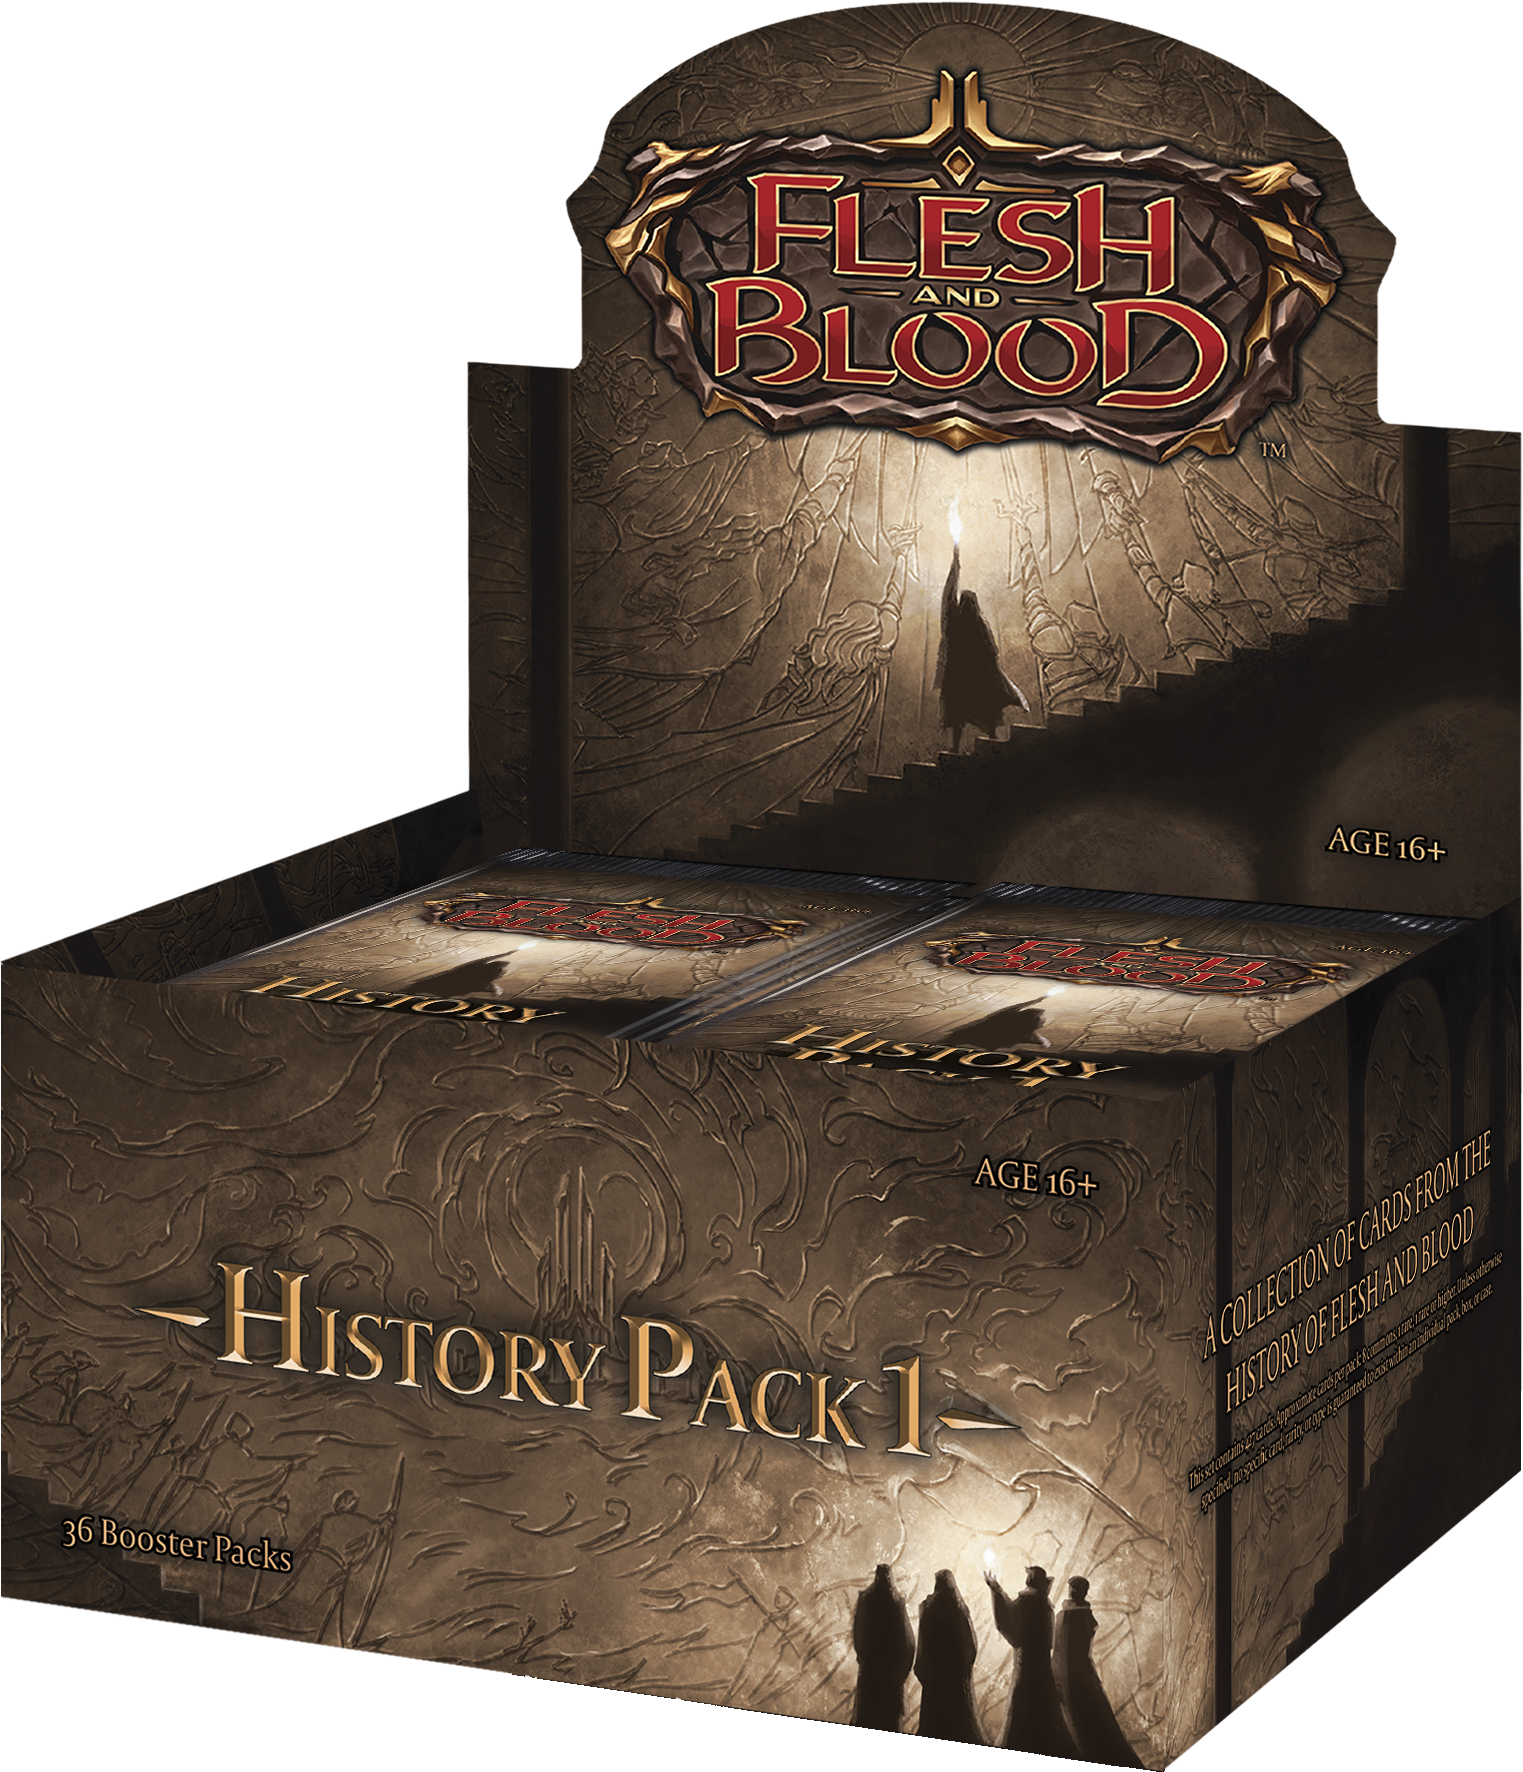 History Pack 1 Booster Box